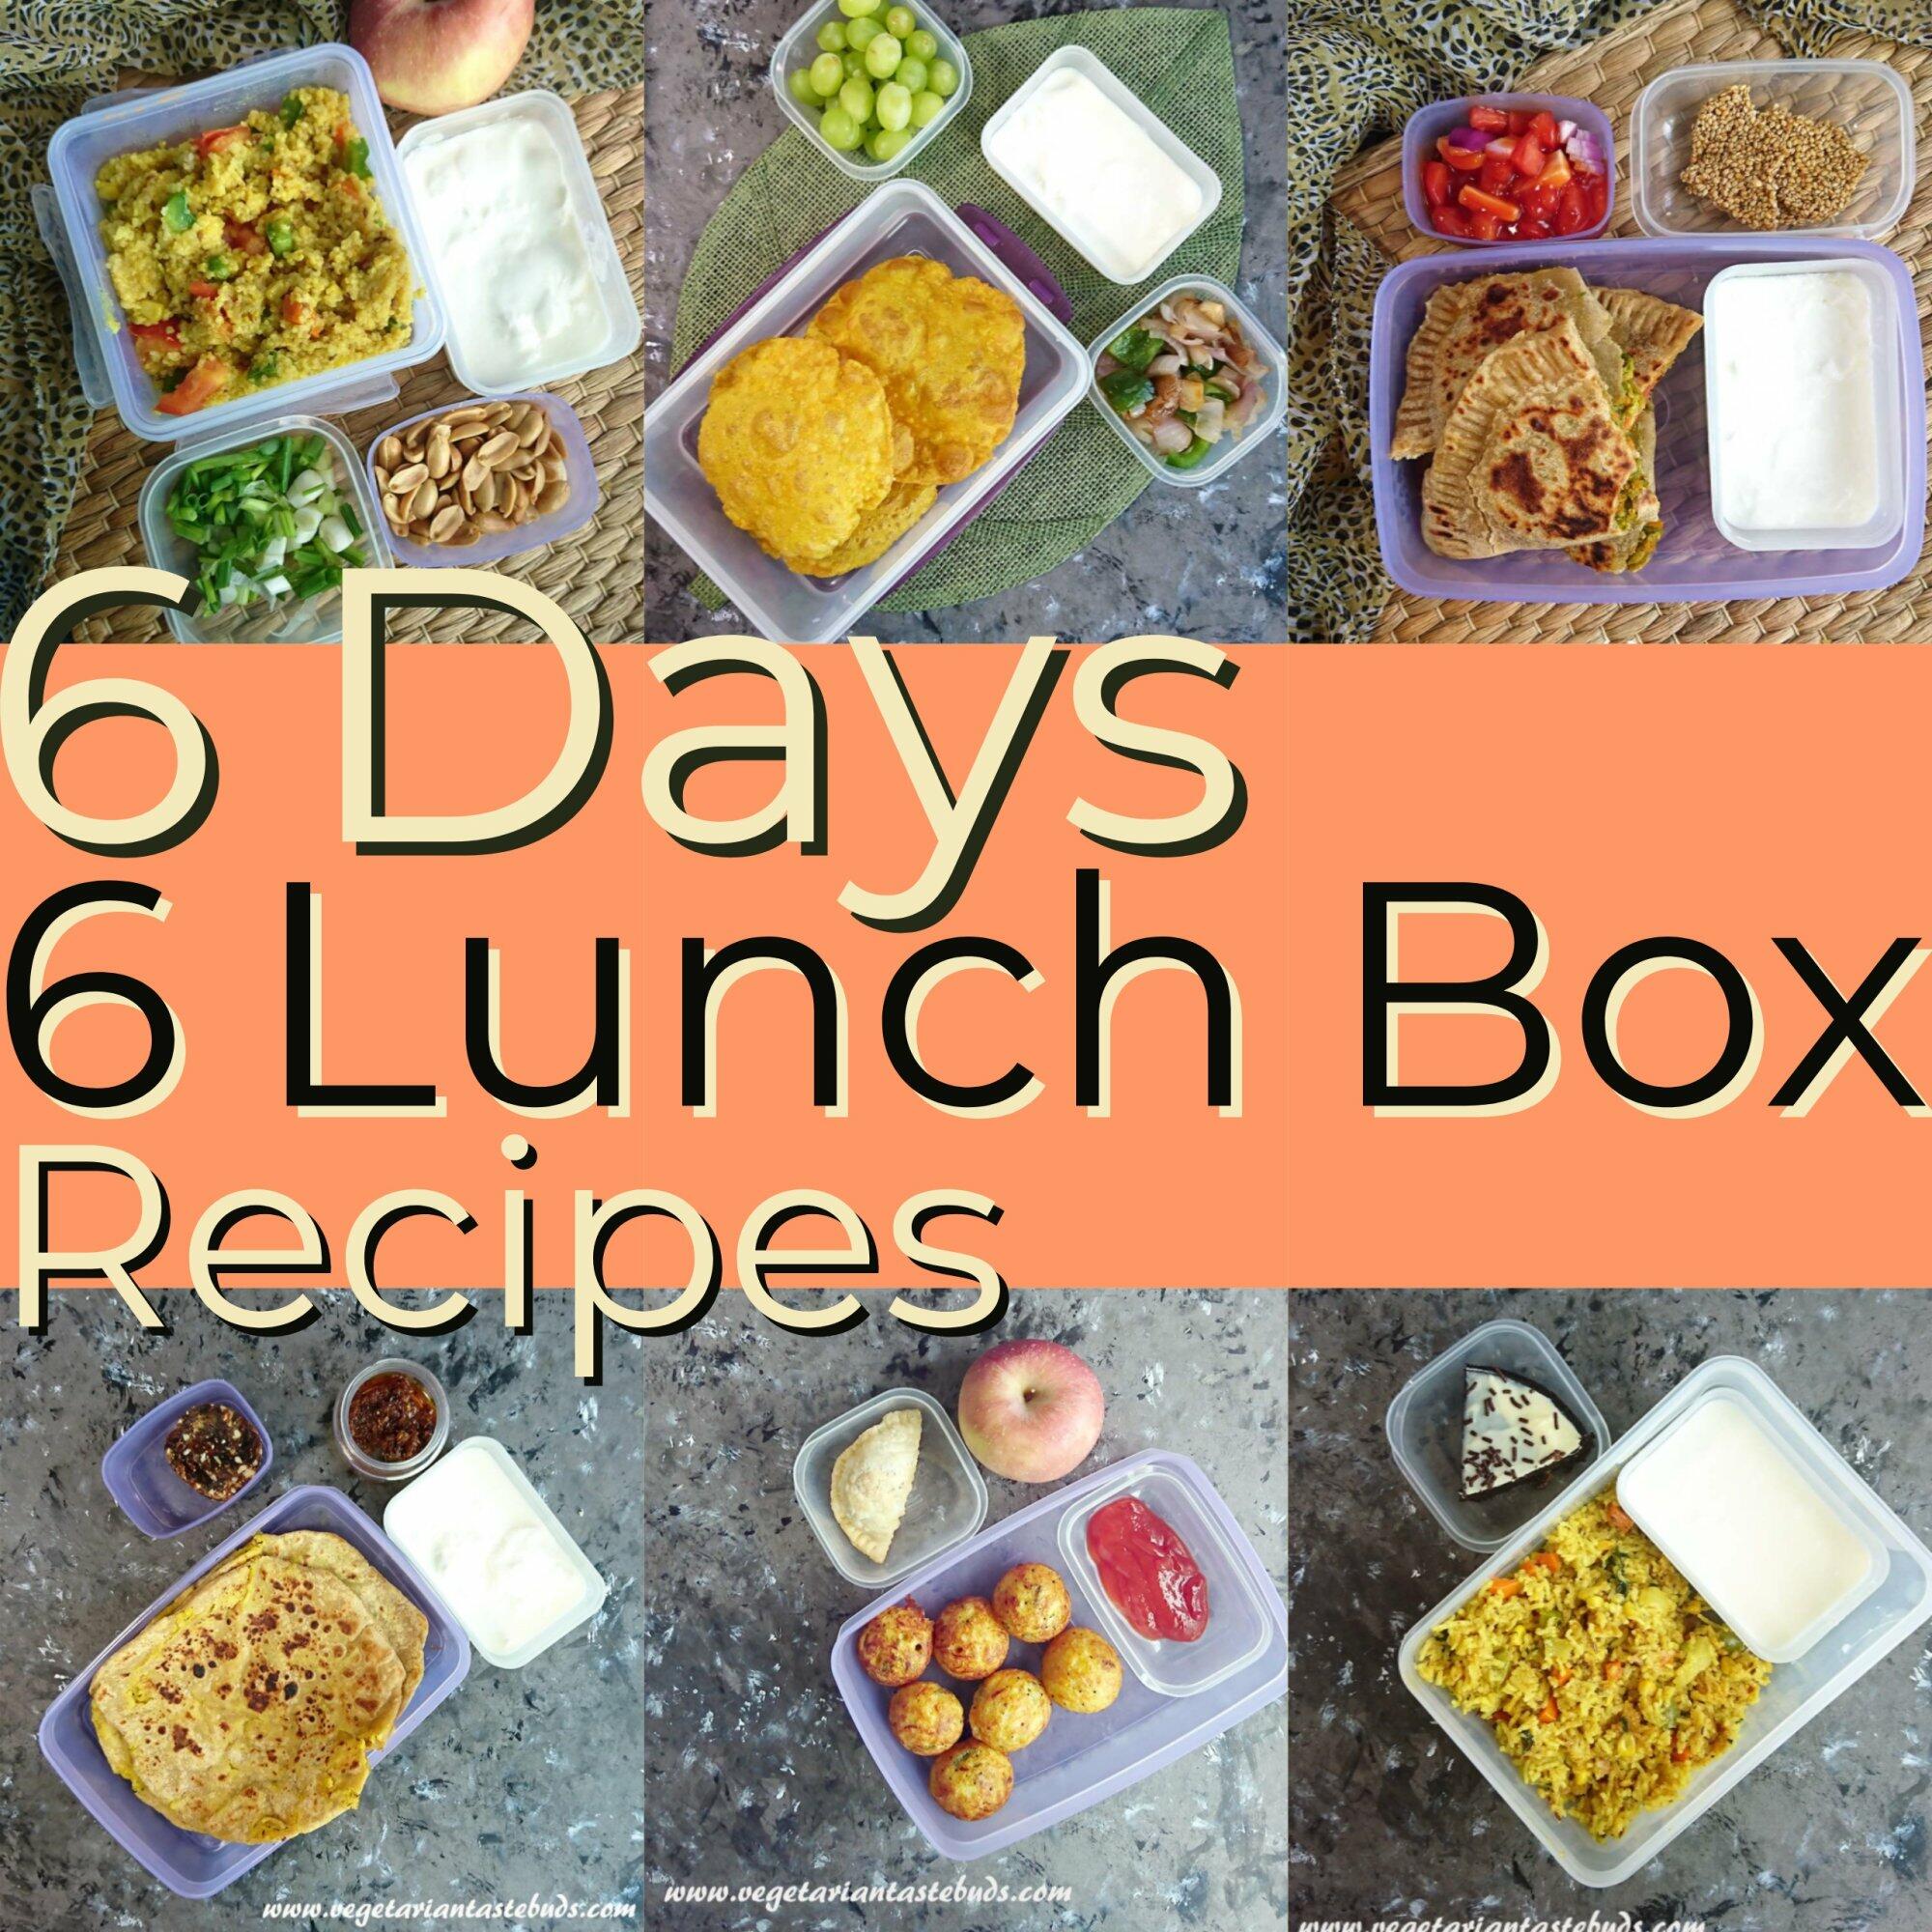 Pin on lunch box ideas